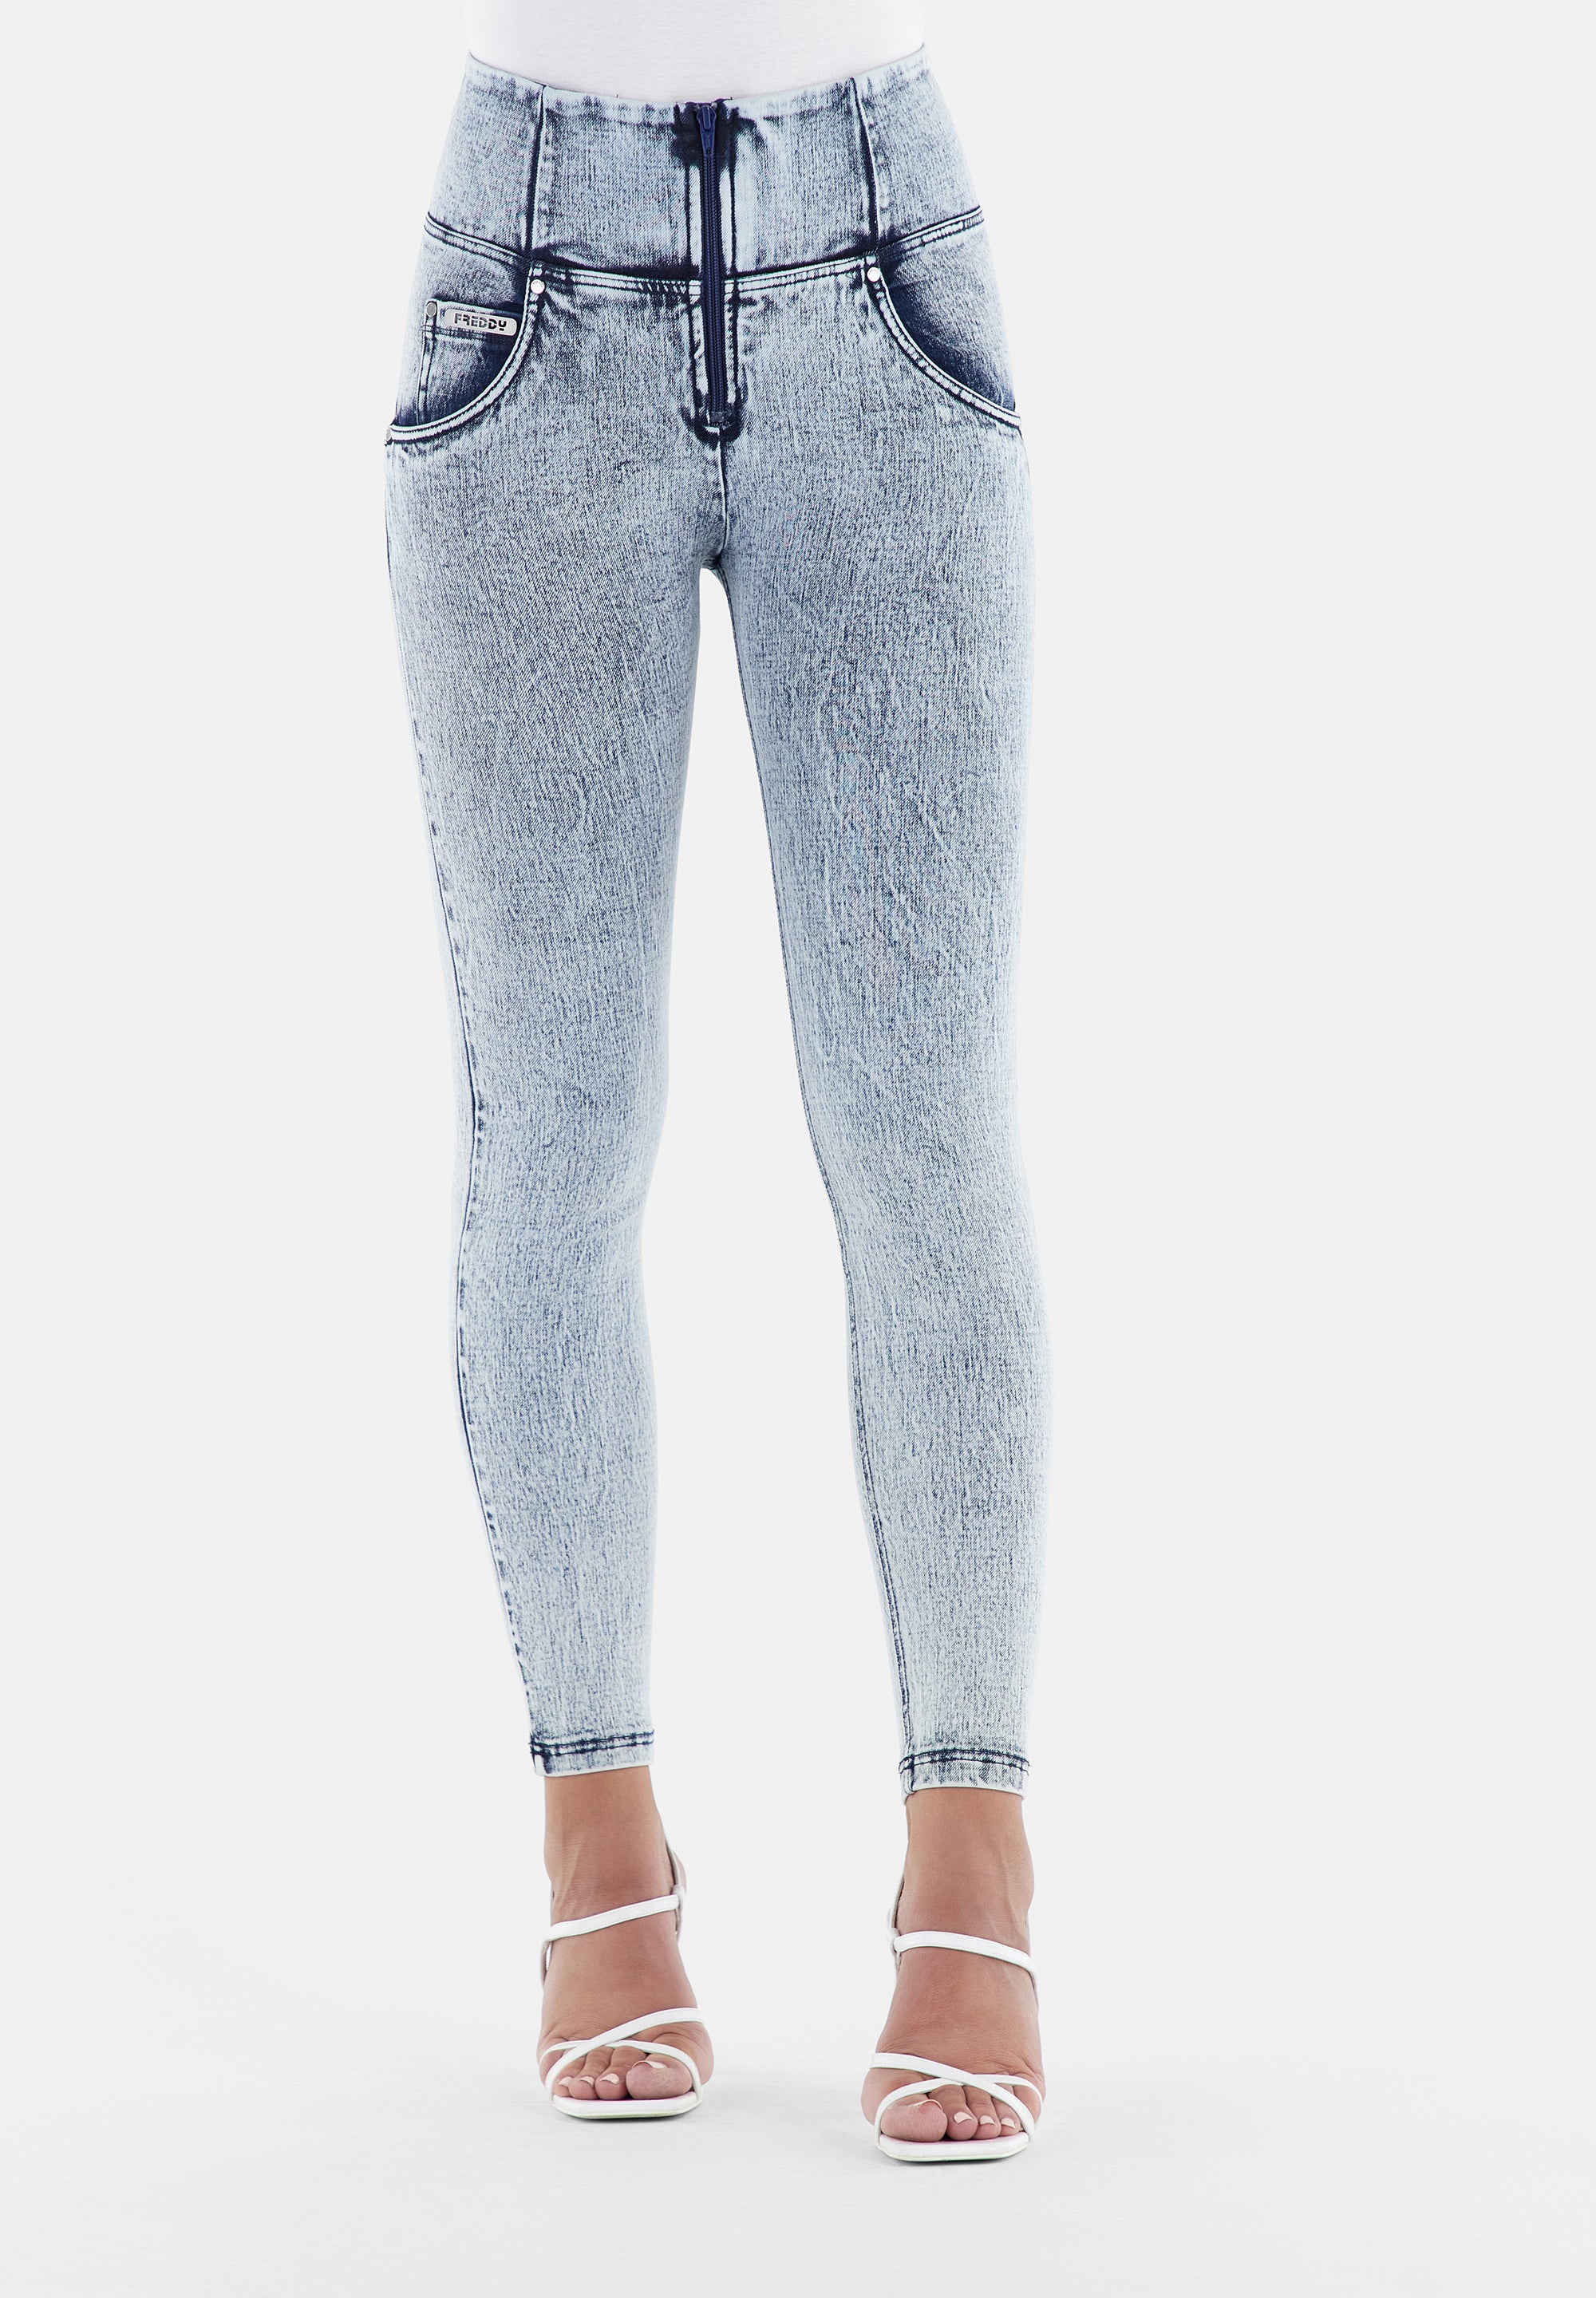 Comfortable Stretchy Denim Blue Pants With Metal Rivets Detailing